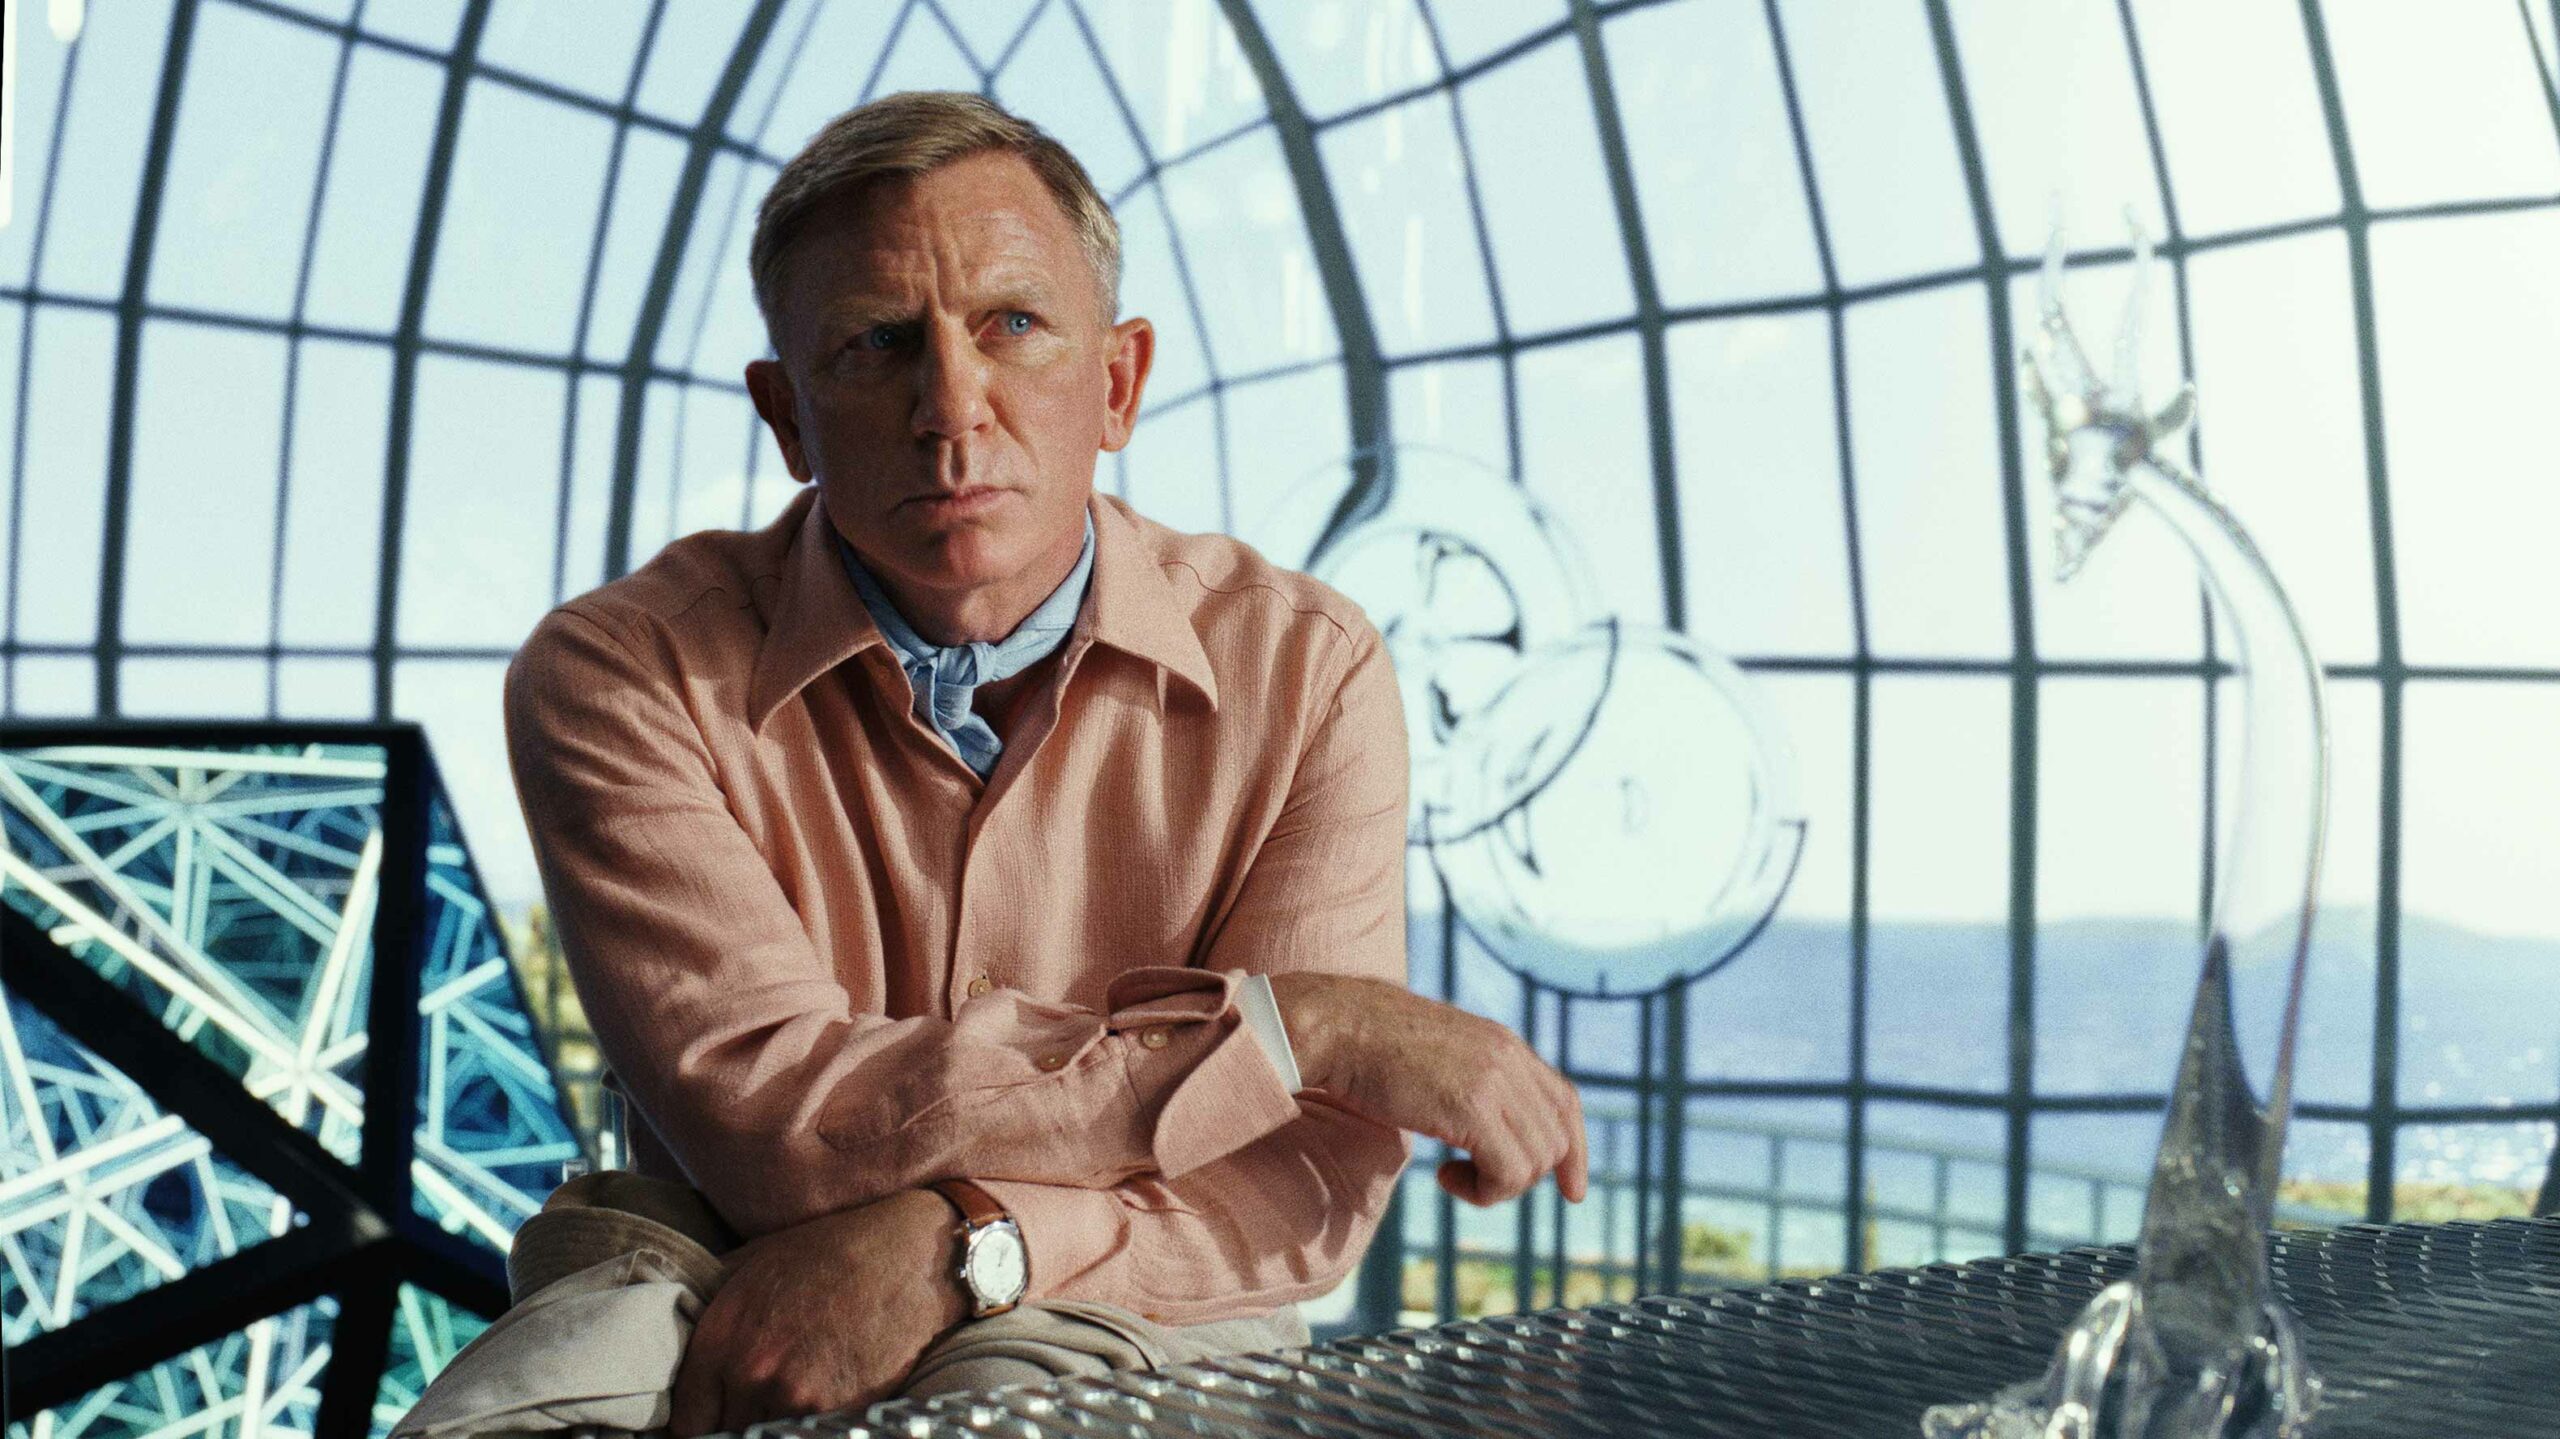 Daniel Craig as Benoit Blanc in Glass Onion: A Knives Out Mystery. He's wearing a pink dress shirt and sitting down while leaning forward. He looks deep in thought.